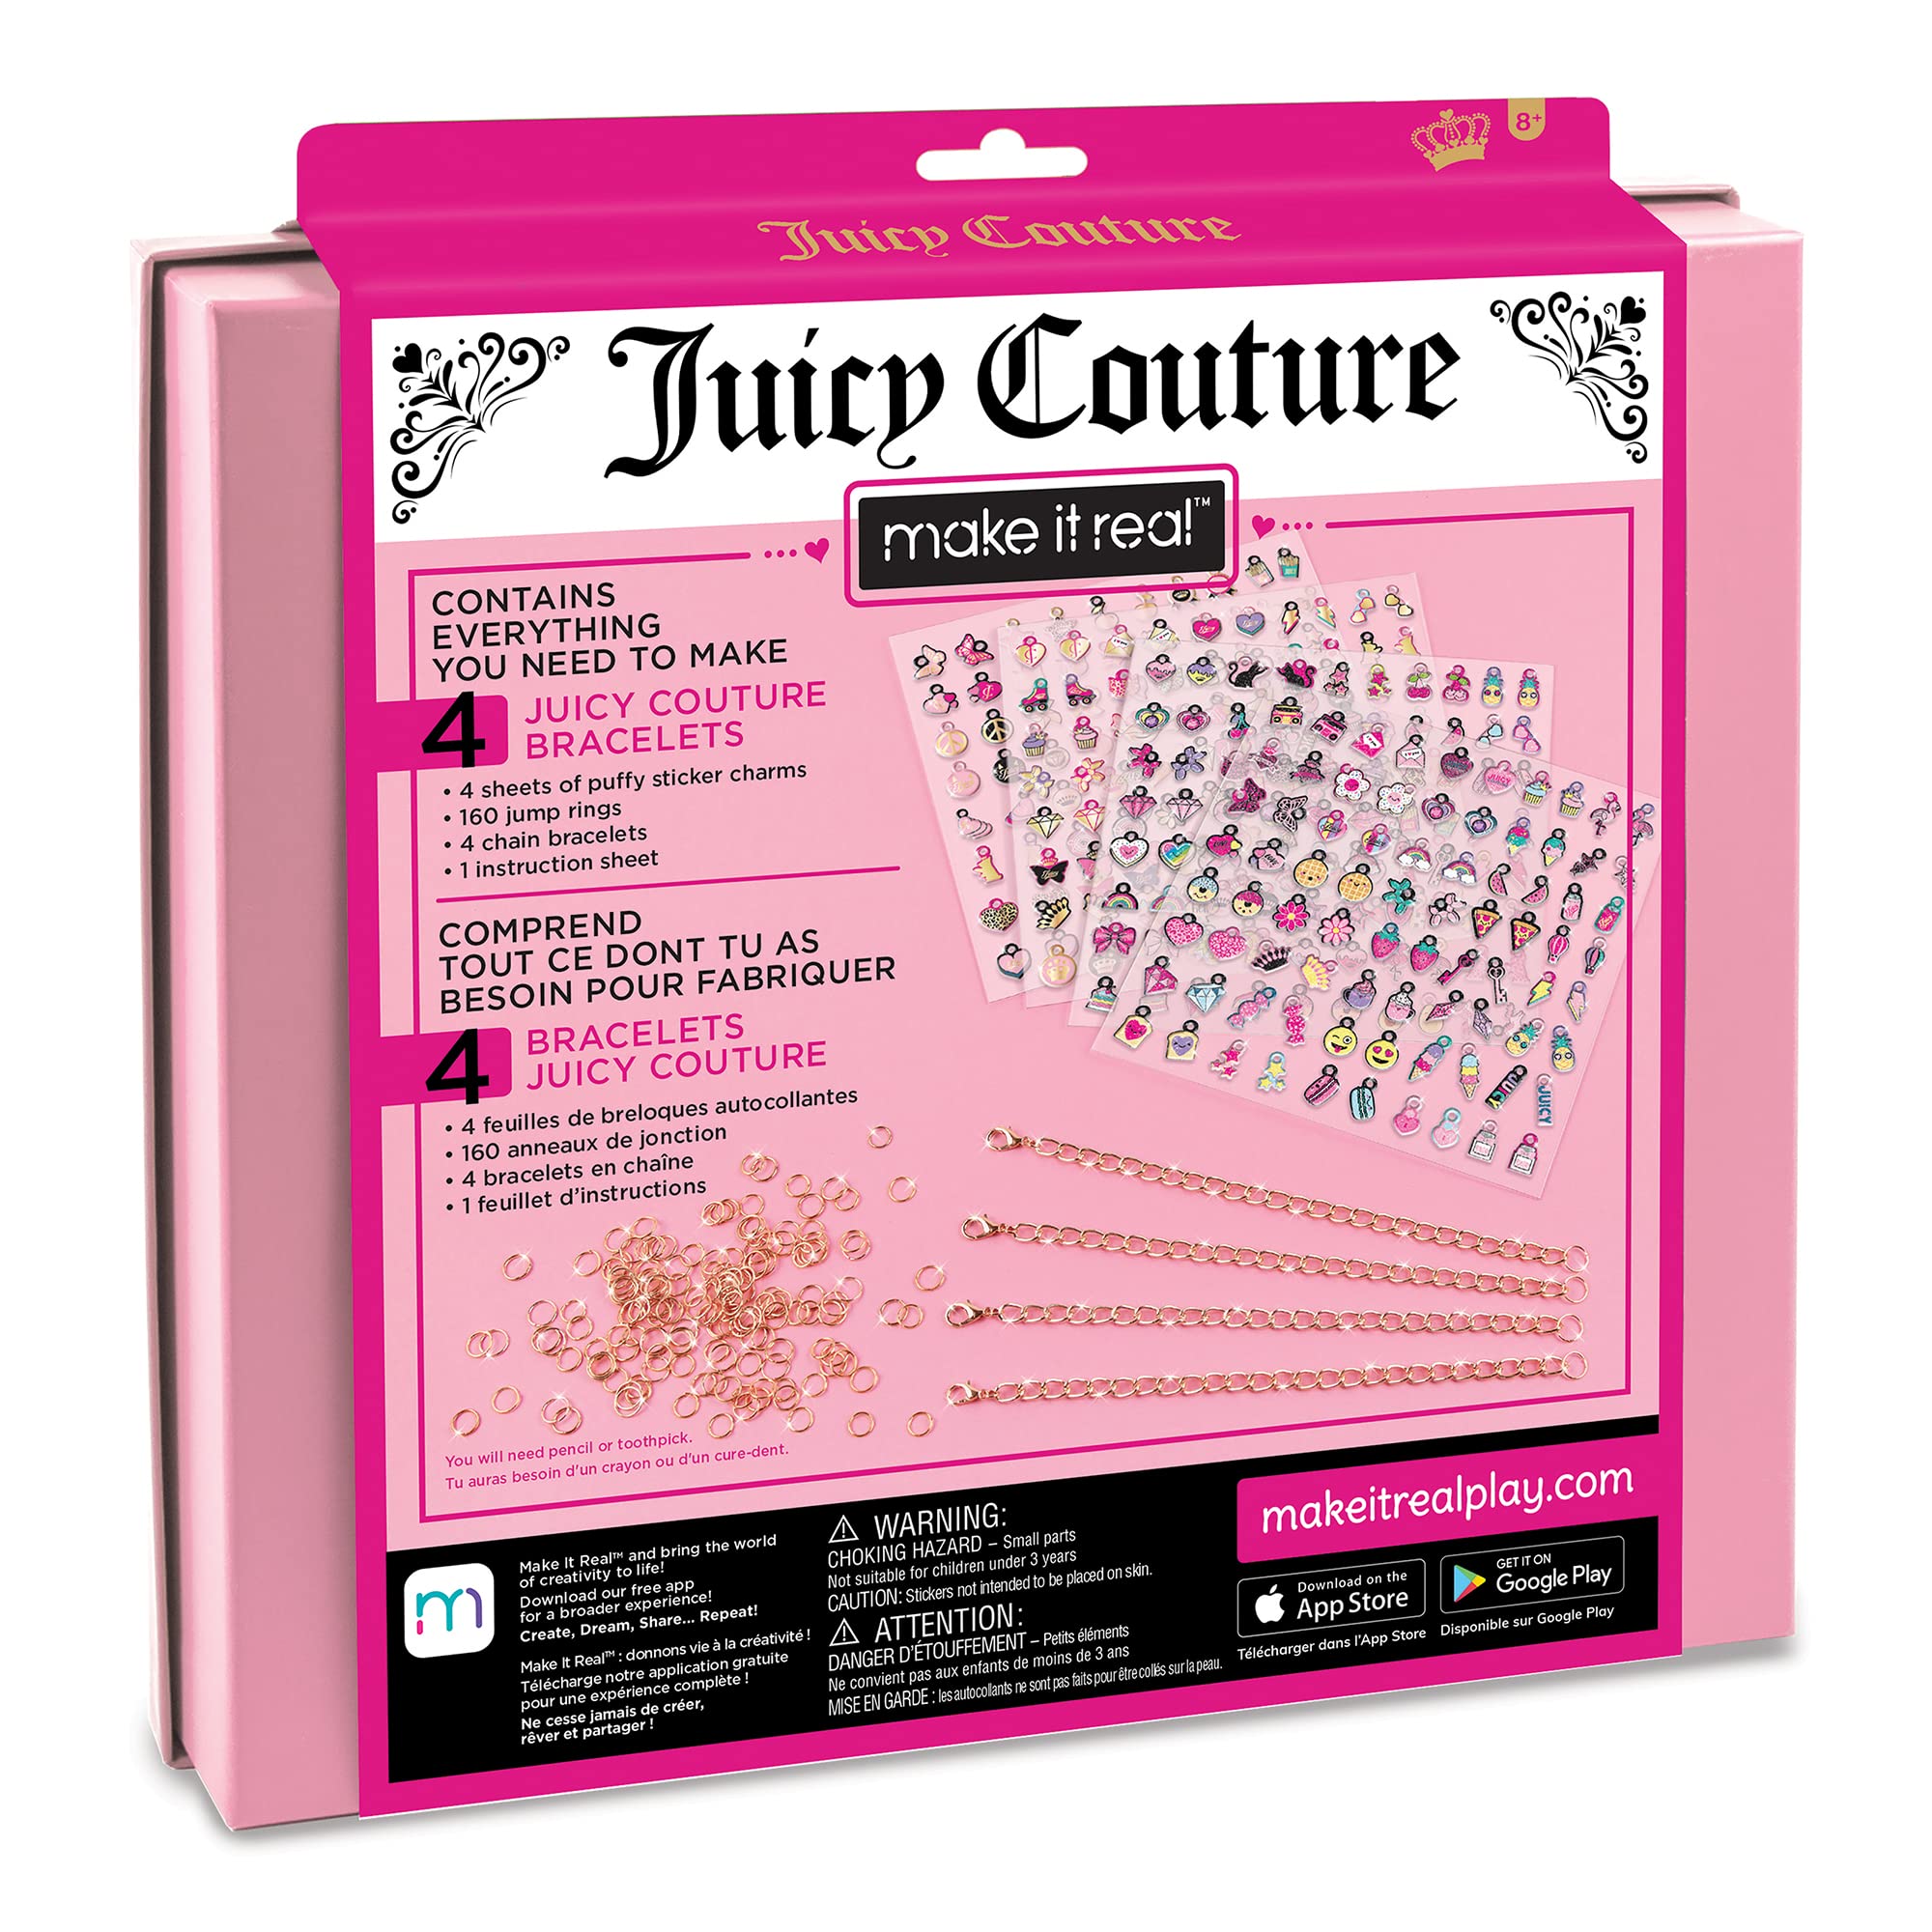 Make It Real - Juicy Couture Absolutely Charming Bracelet Making Kit - Kids Jewelry Making Kit - DIY Charm Bracelet Making Kit for Girls - Friendship Bracelets with Charms for Girls 8-10-12-14